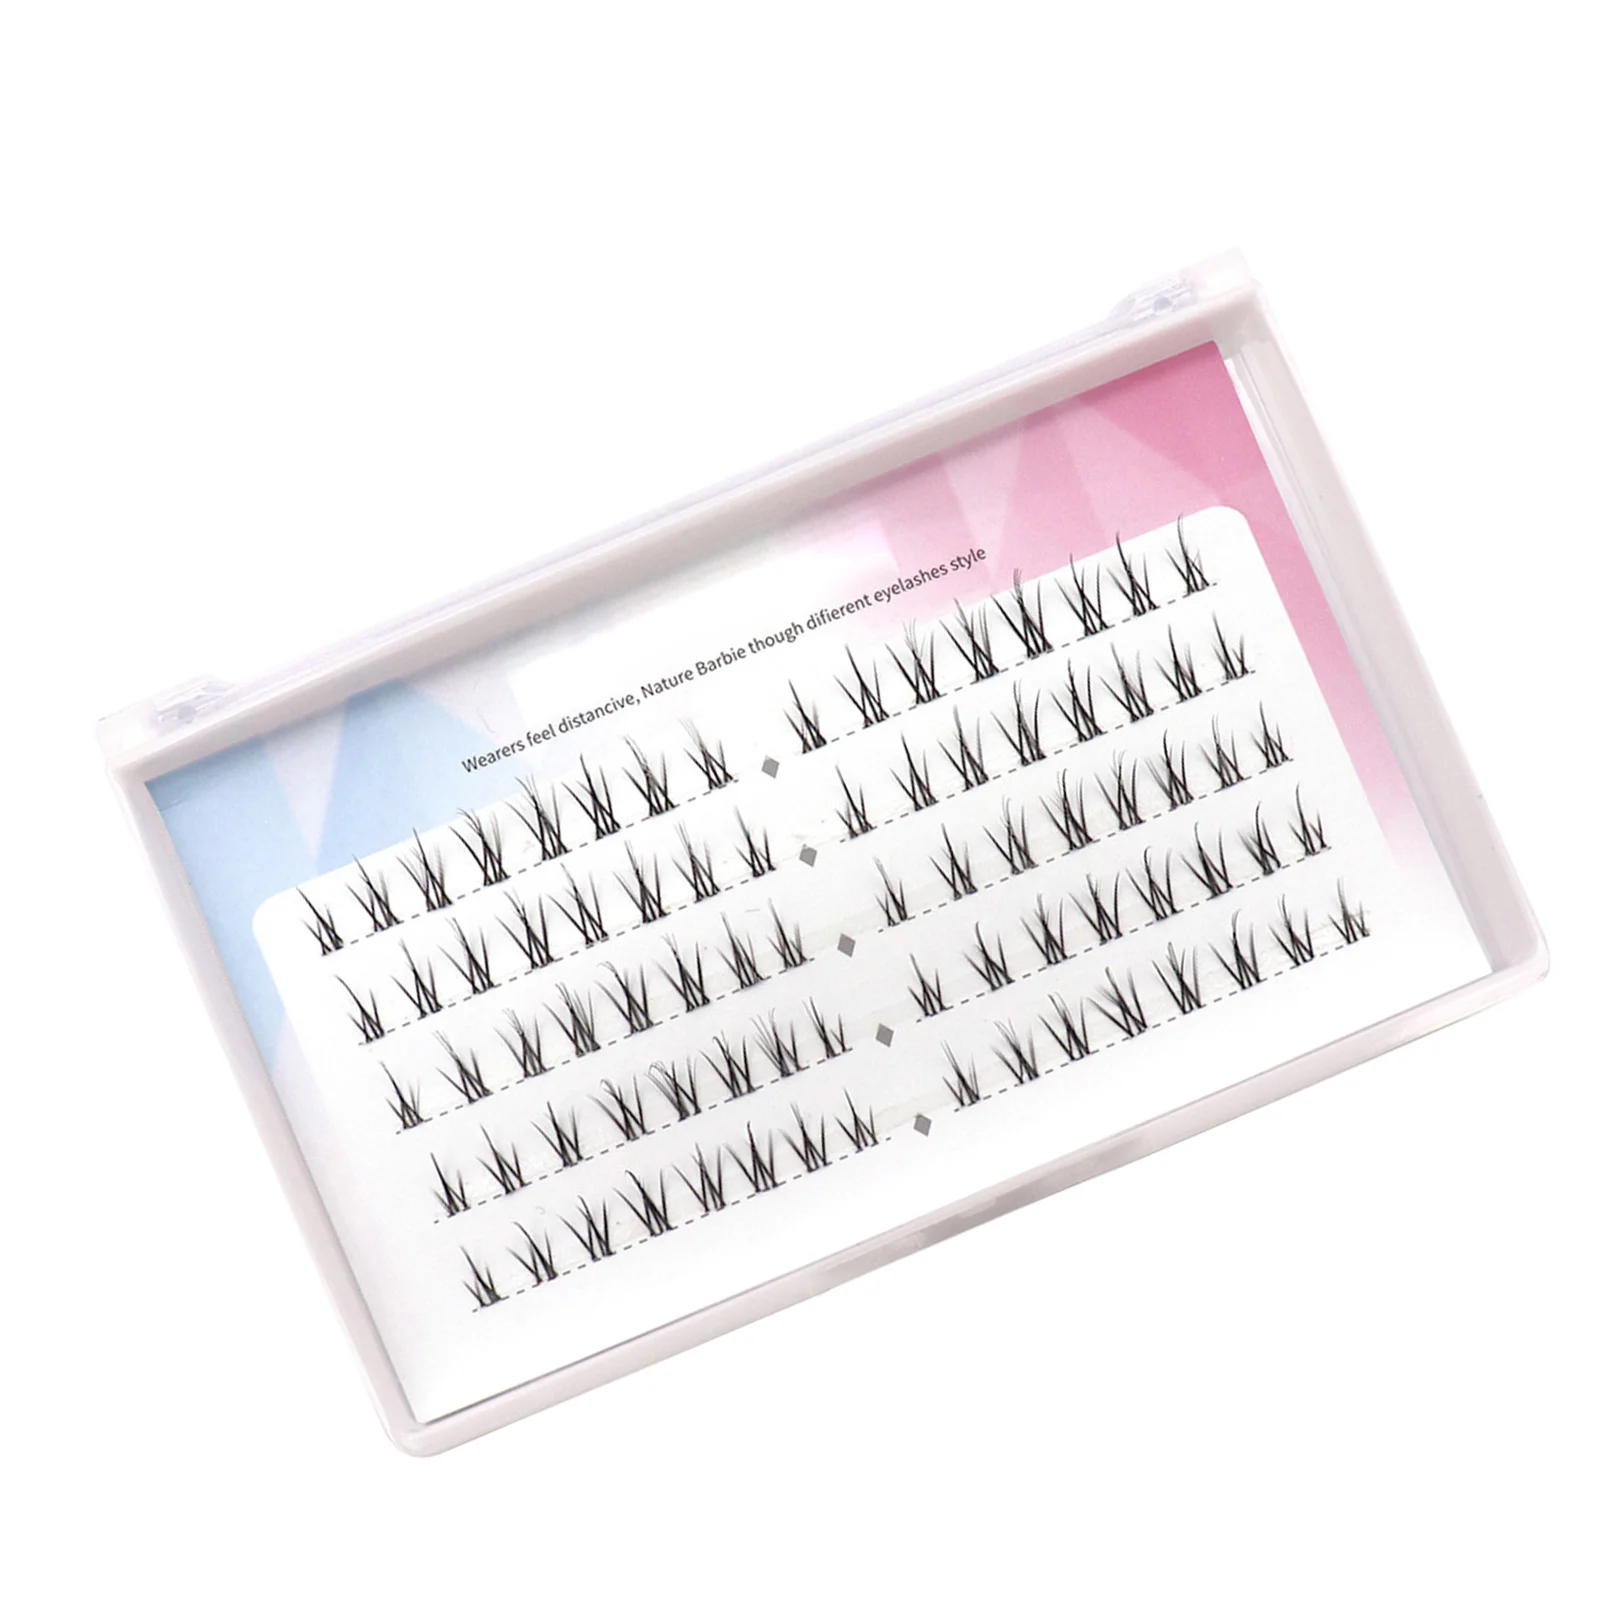 

Thick Long Eyelash Extensions Soft Comfortable No Irritation Lashes for Women Girls Daily Wearing MH88